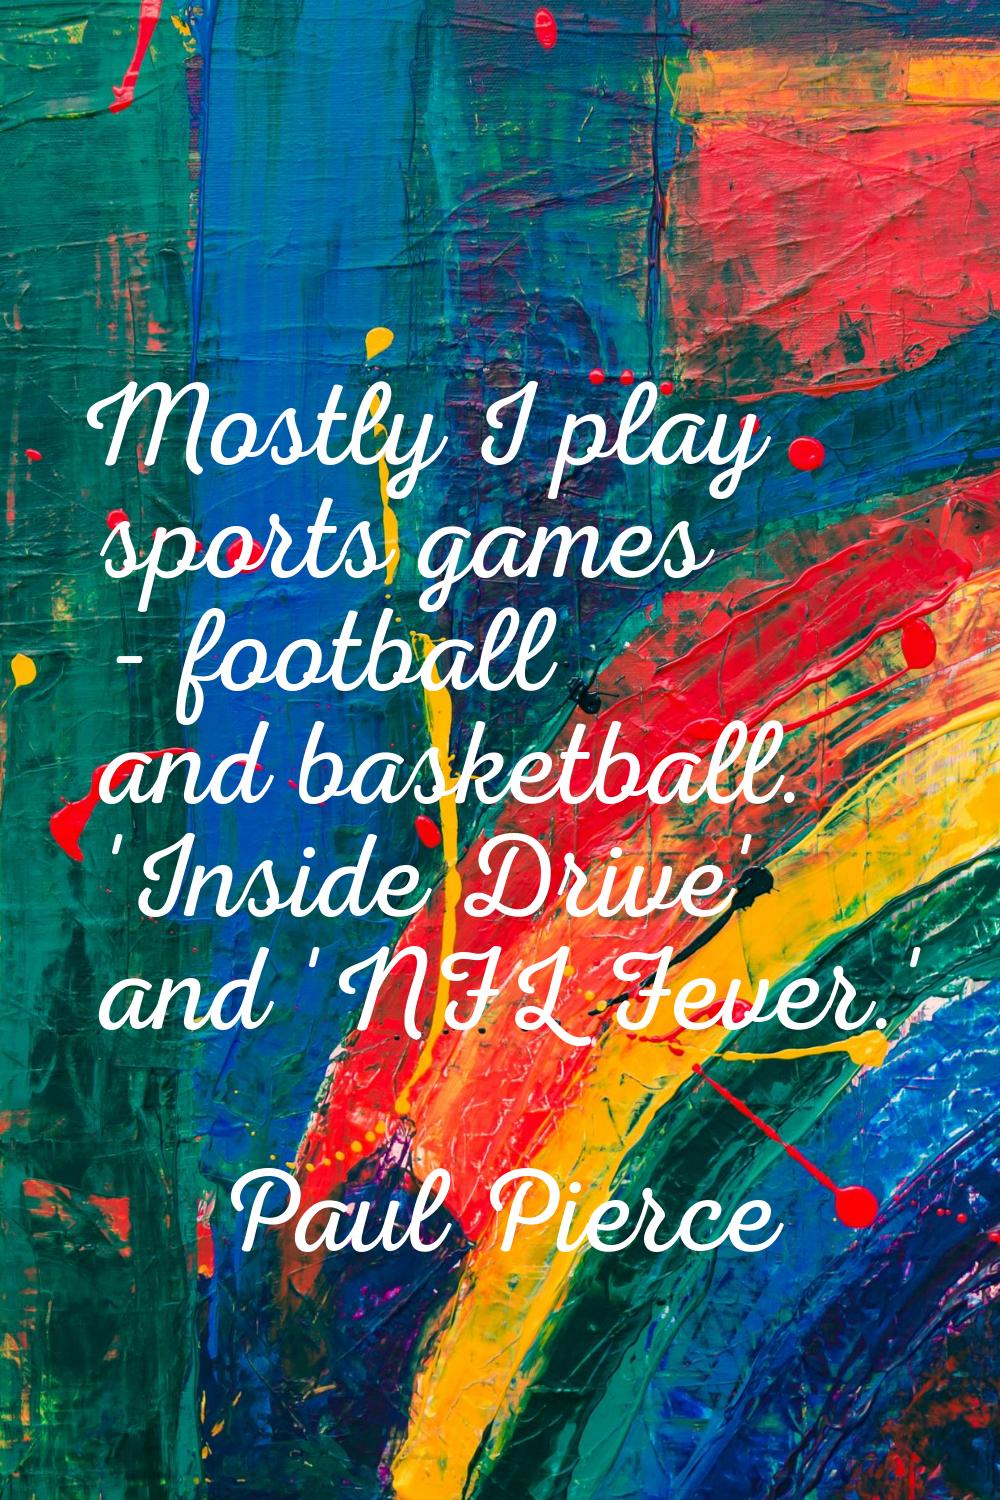 Mostly I play sports games - football and basketball. 'Inside Drive' and 'NFL Fever.'